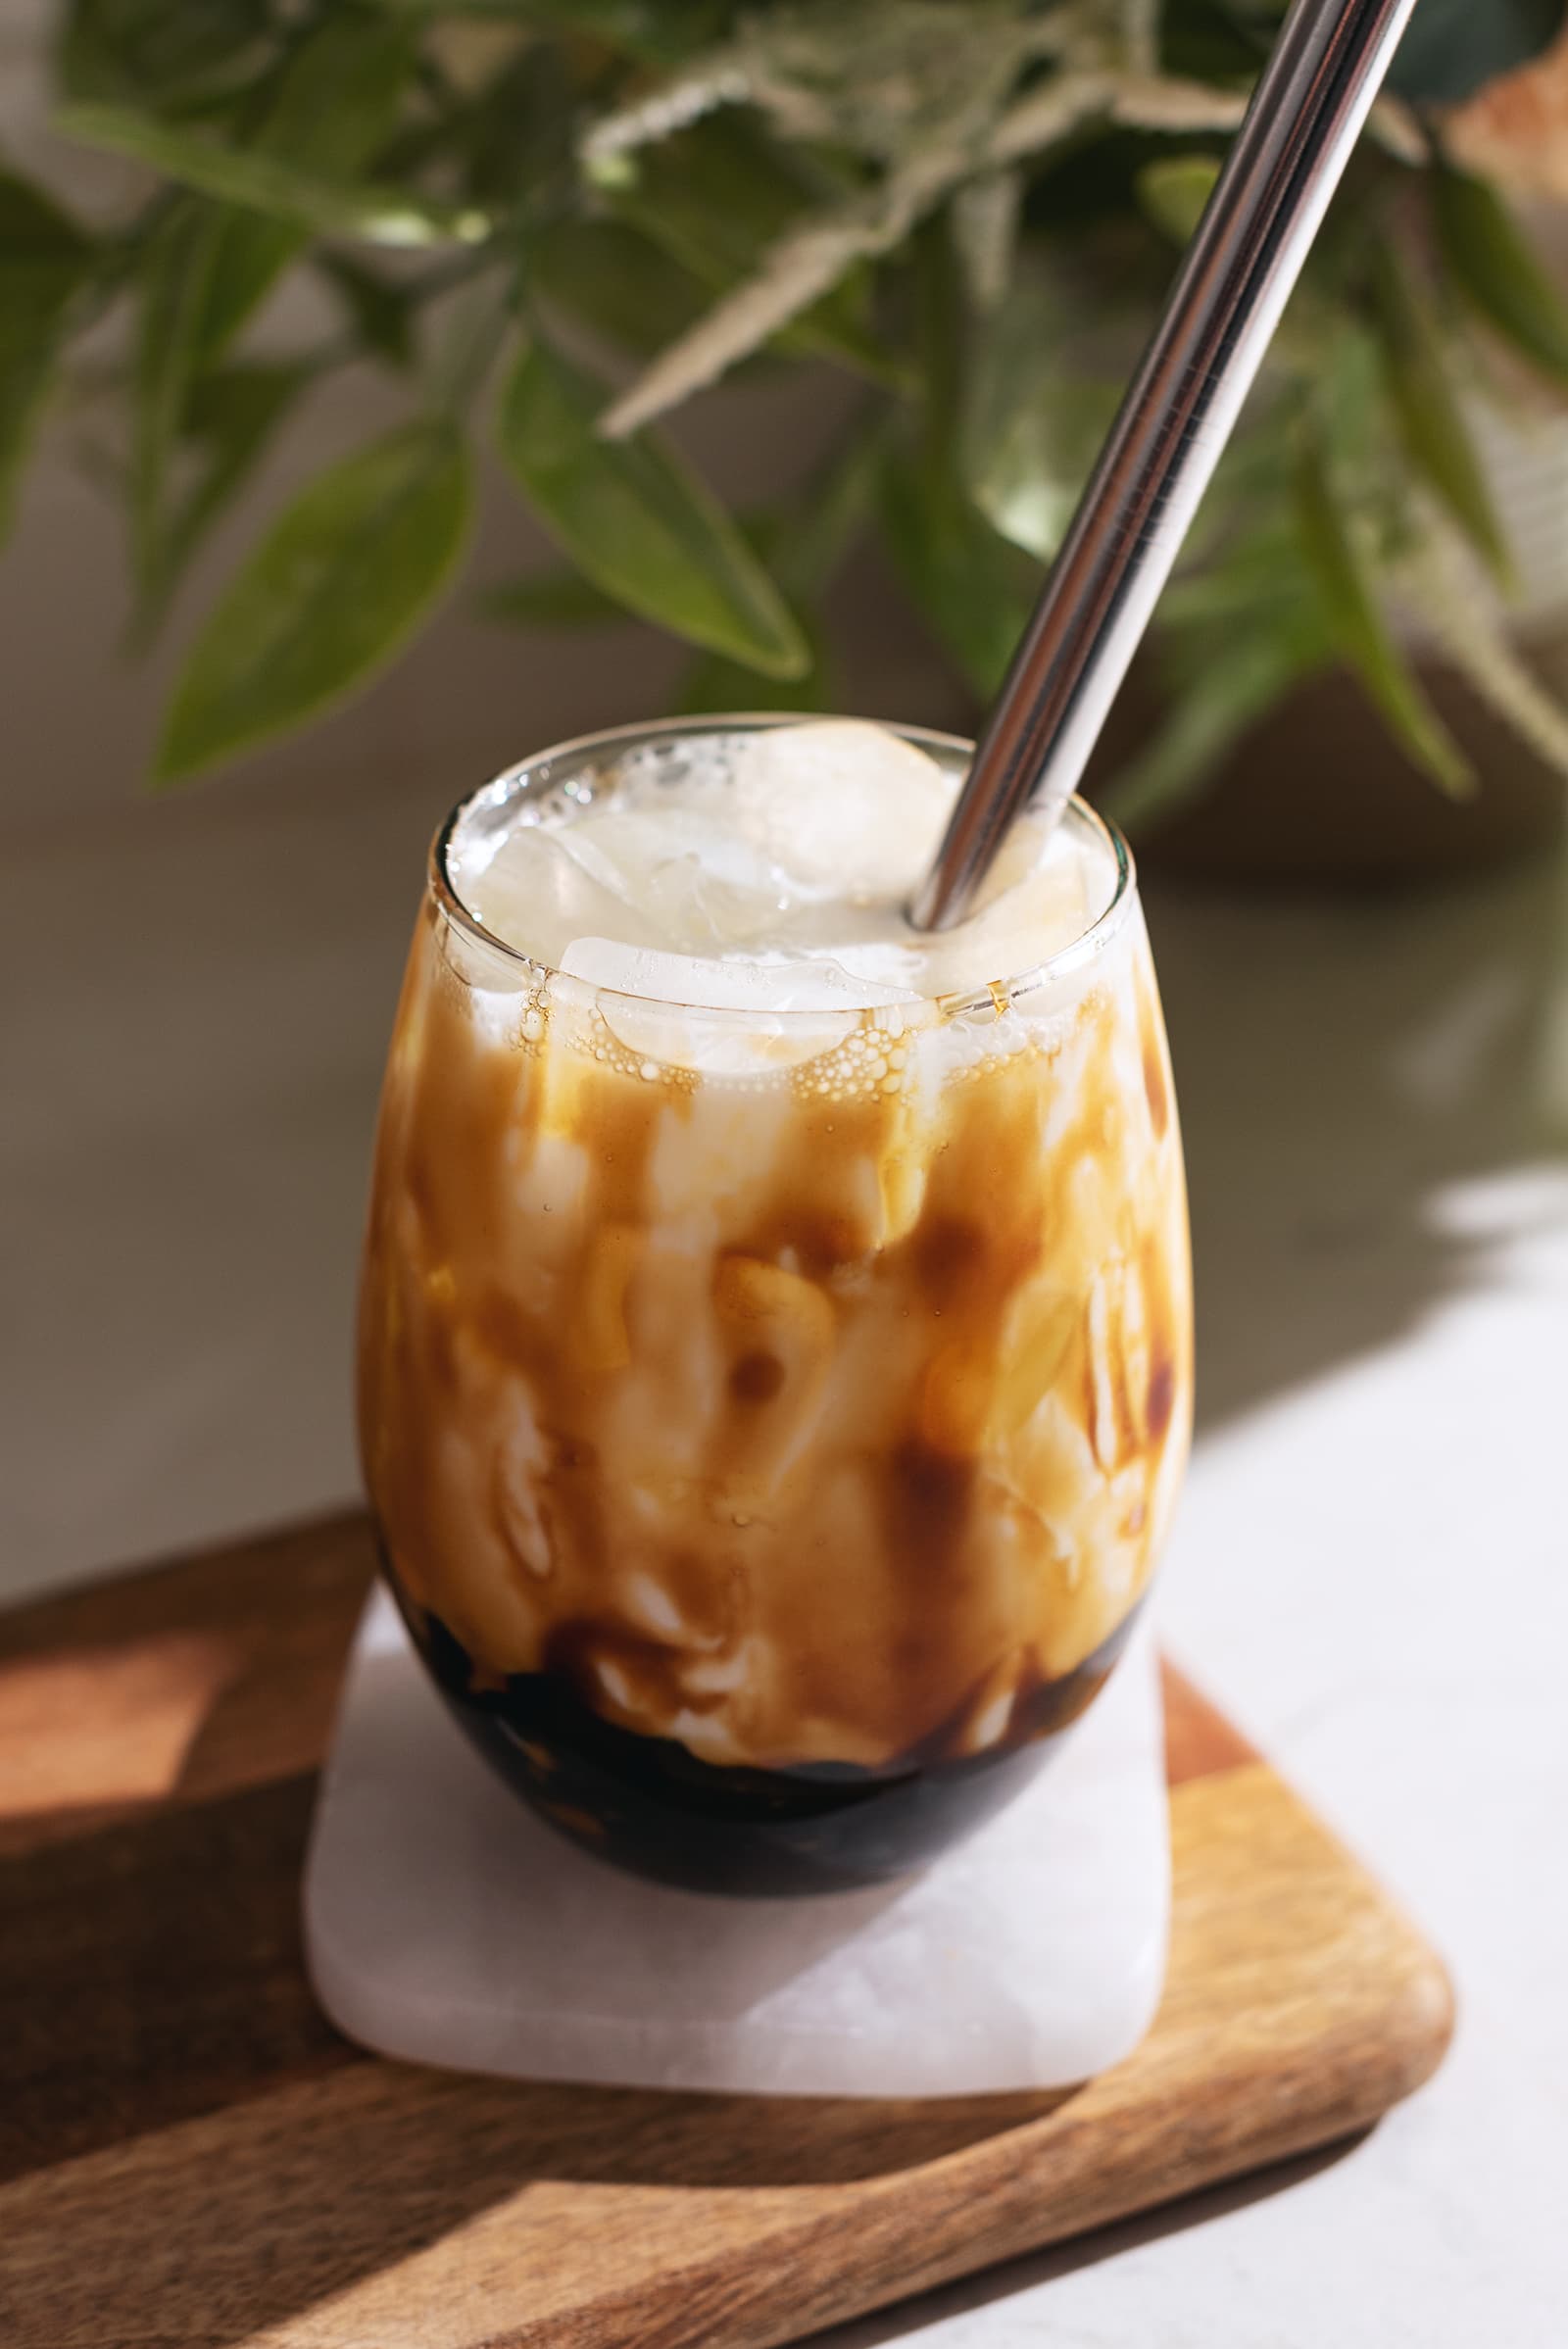 Glass drizzled with brown sugar syrup and filled with milk and boba.